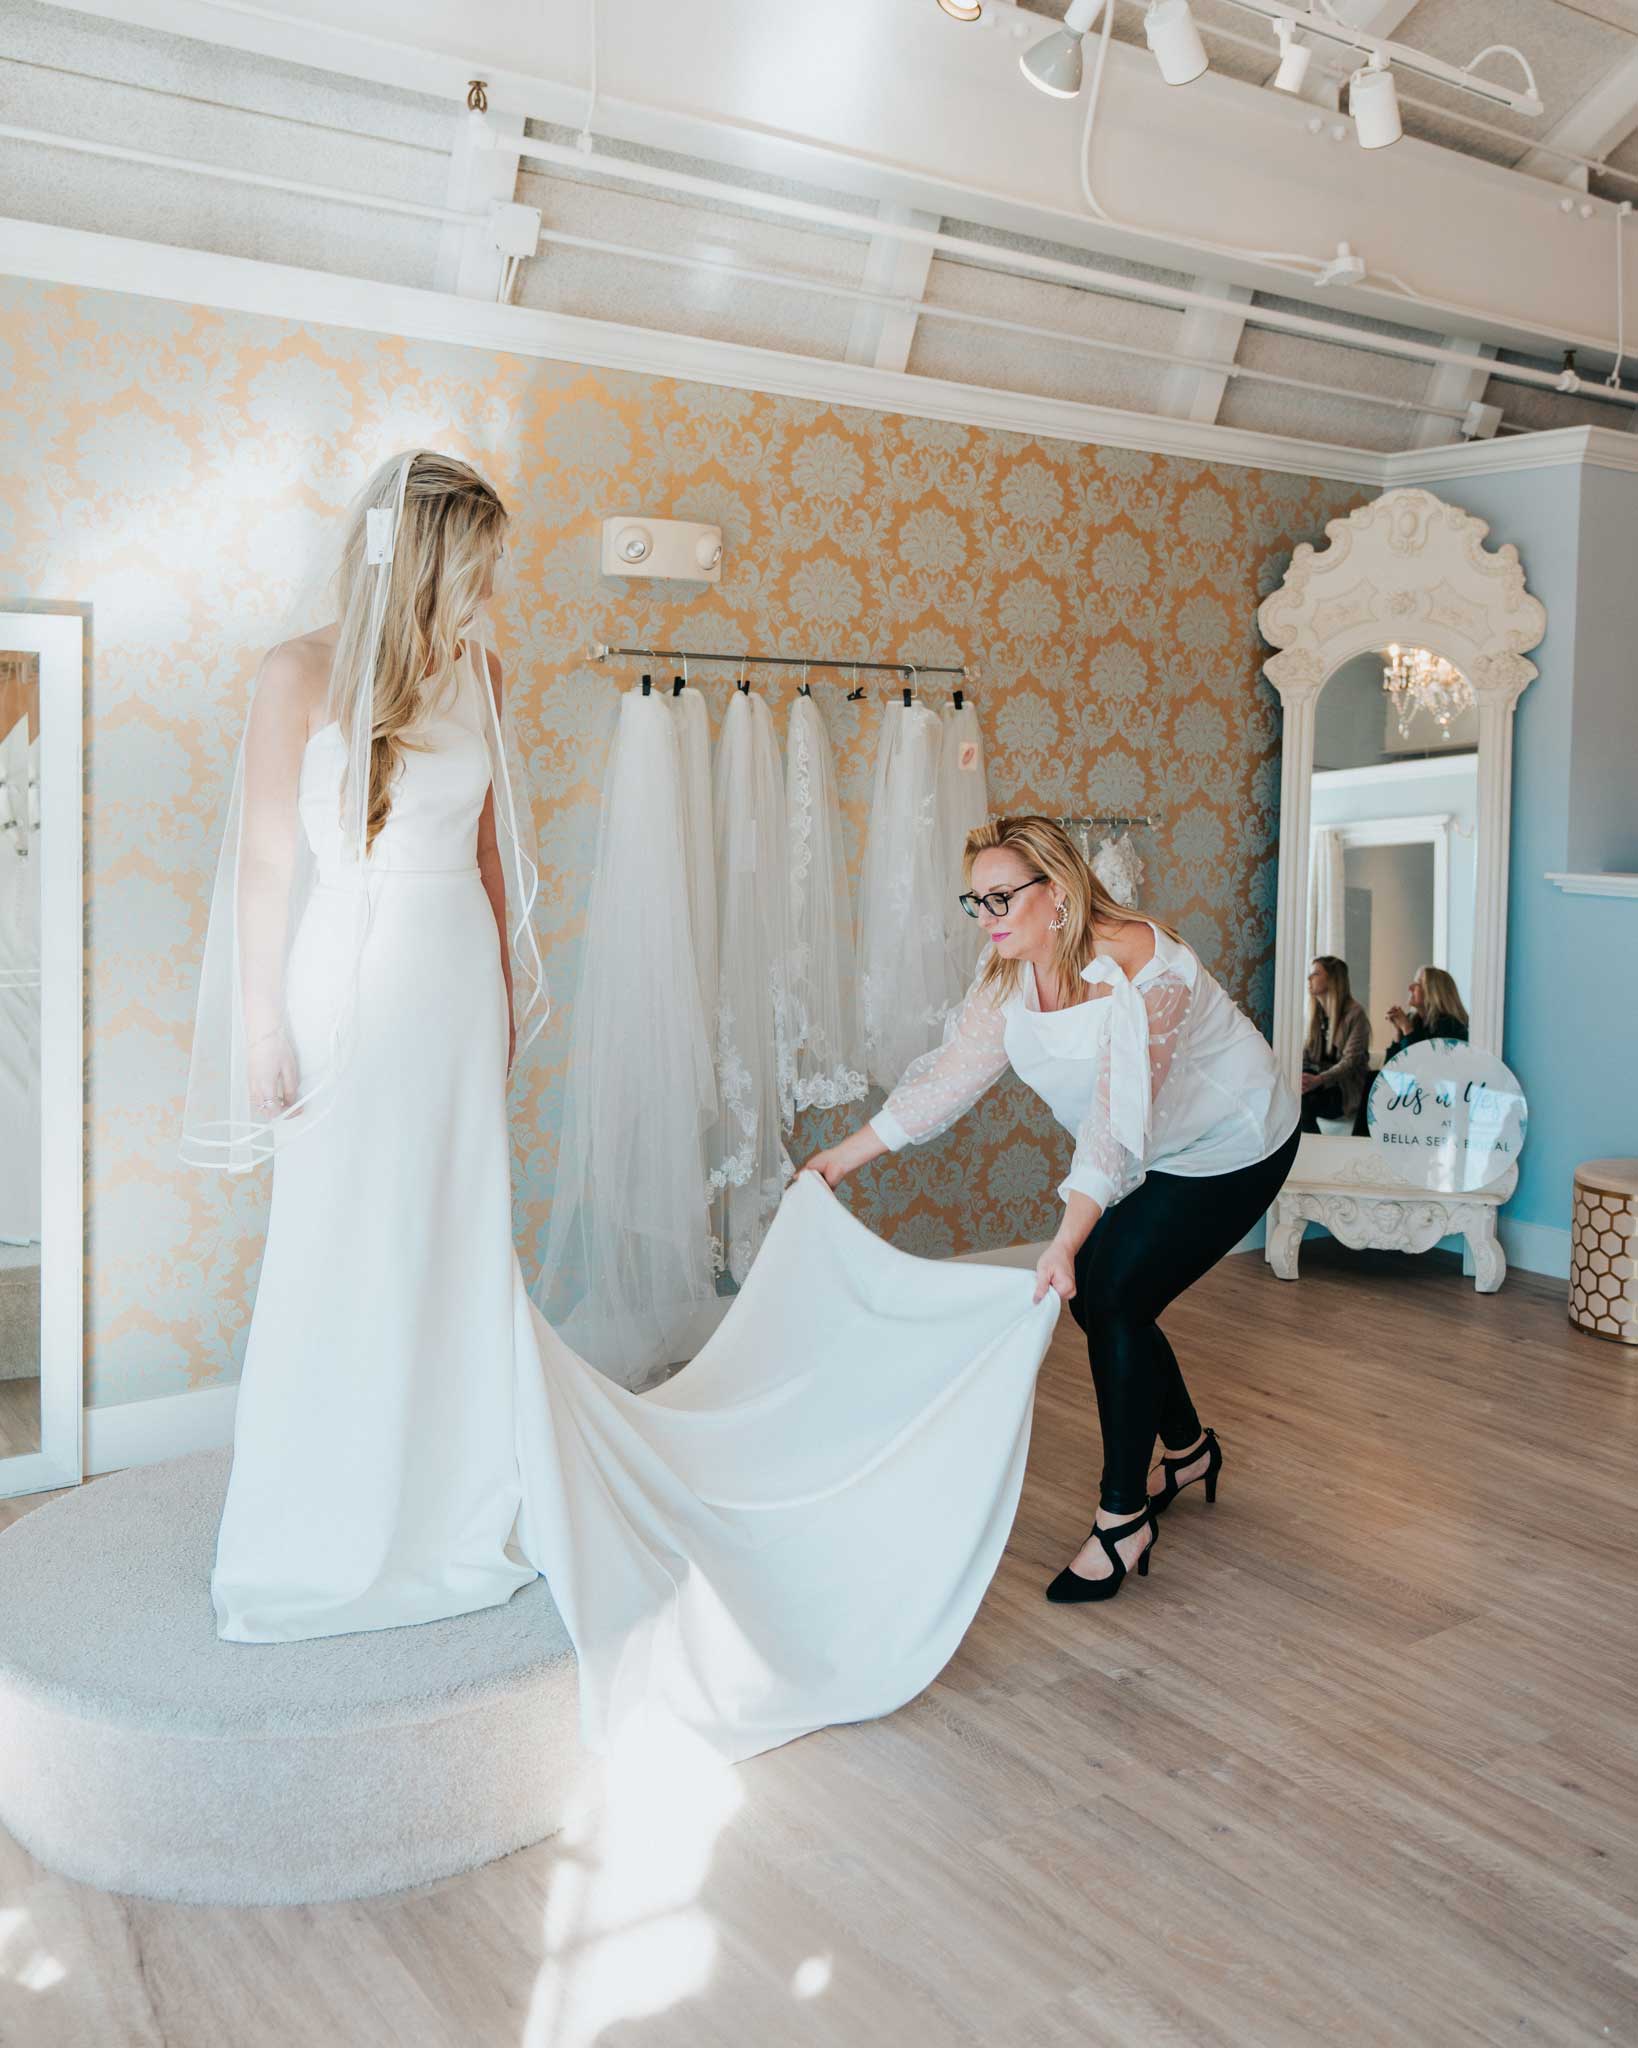 A woman is trying on wedding dresses in a bridal salon.